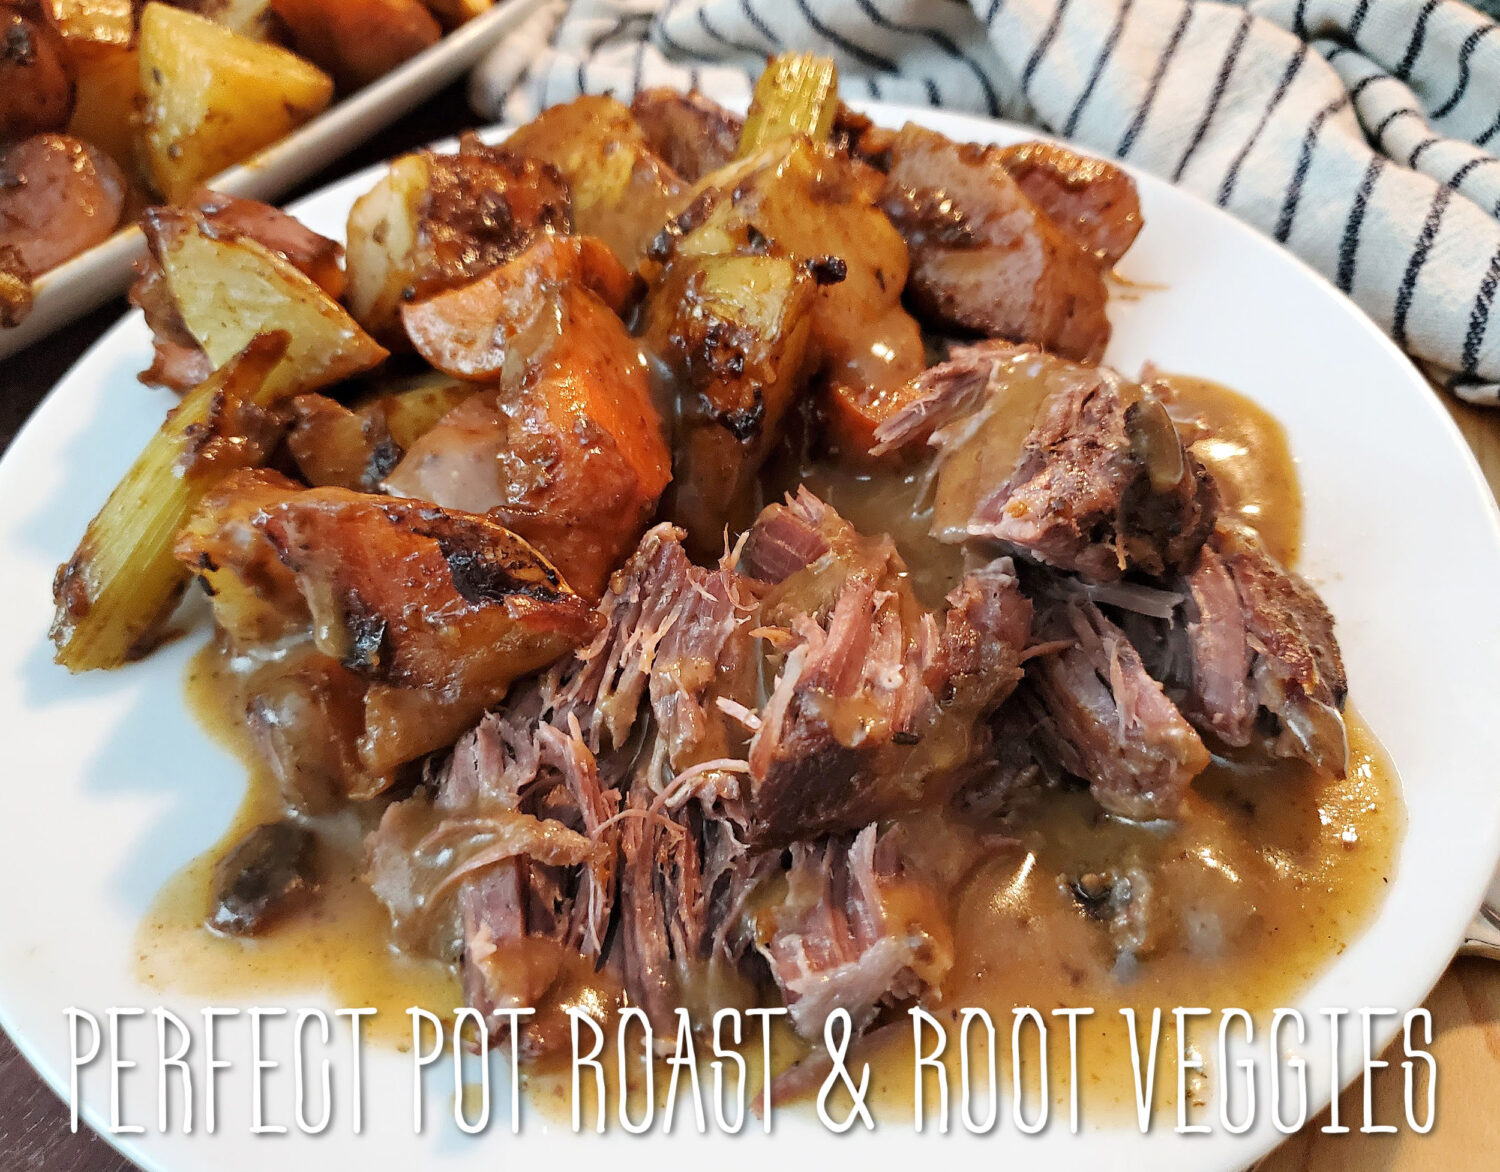 Perfect Pot Roast & Root Veggies: Yukon Gold, Parsnips, Carrots, and Sweet Onions baked with herbs & red wine for an earthy homemade gravy.